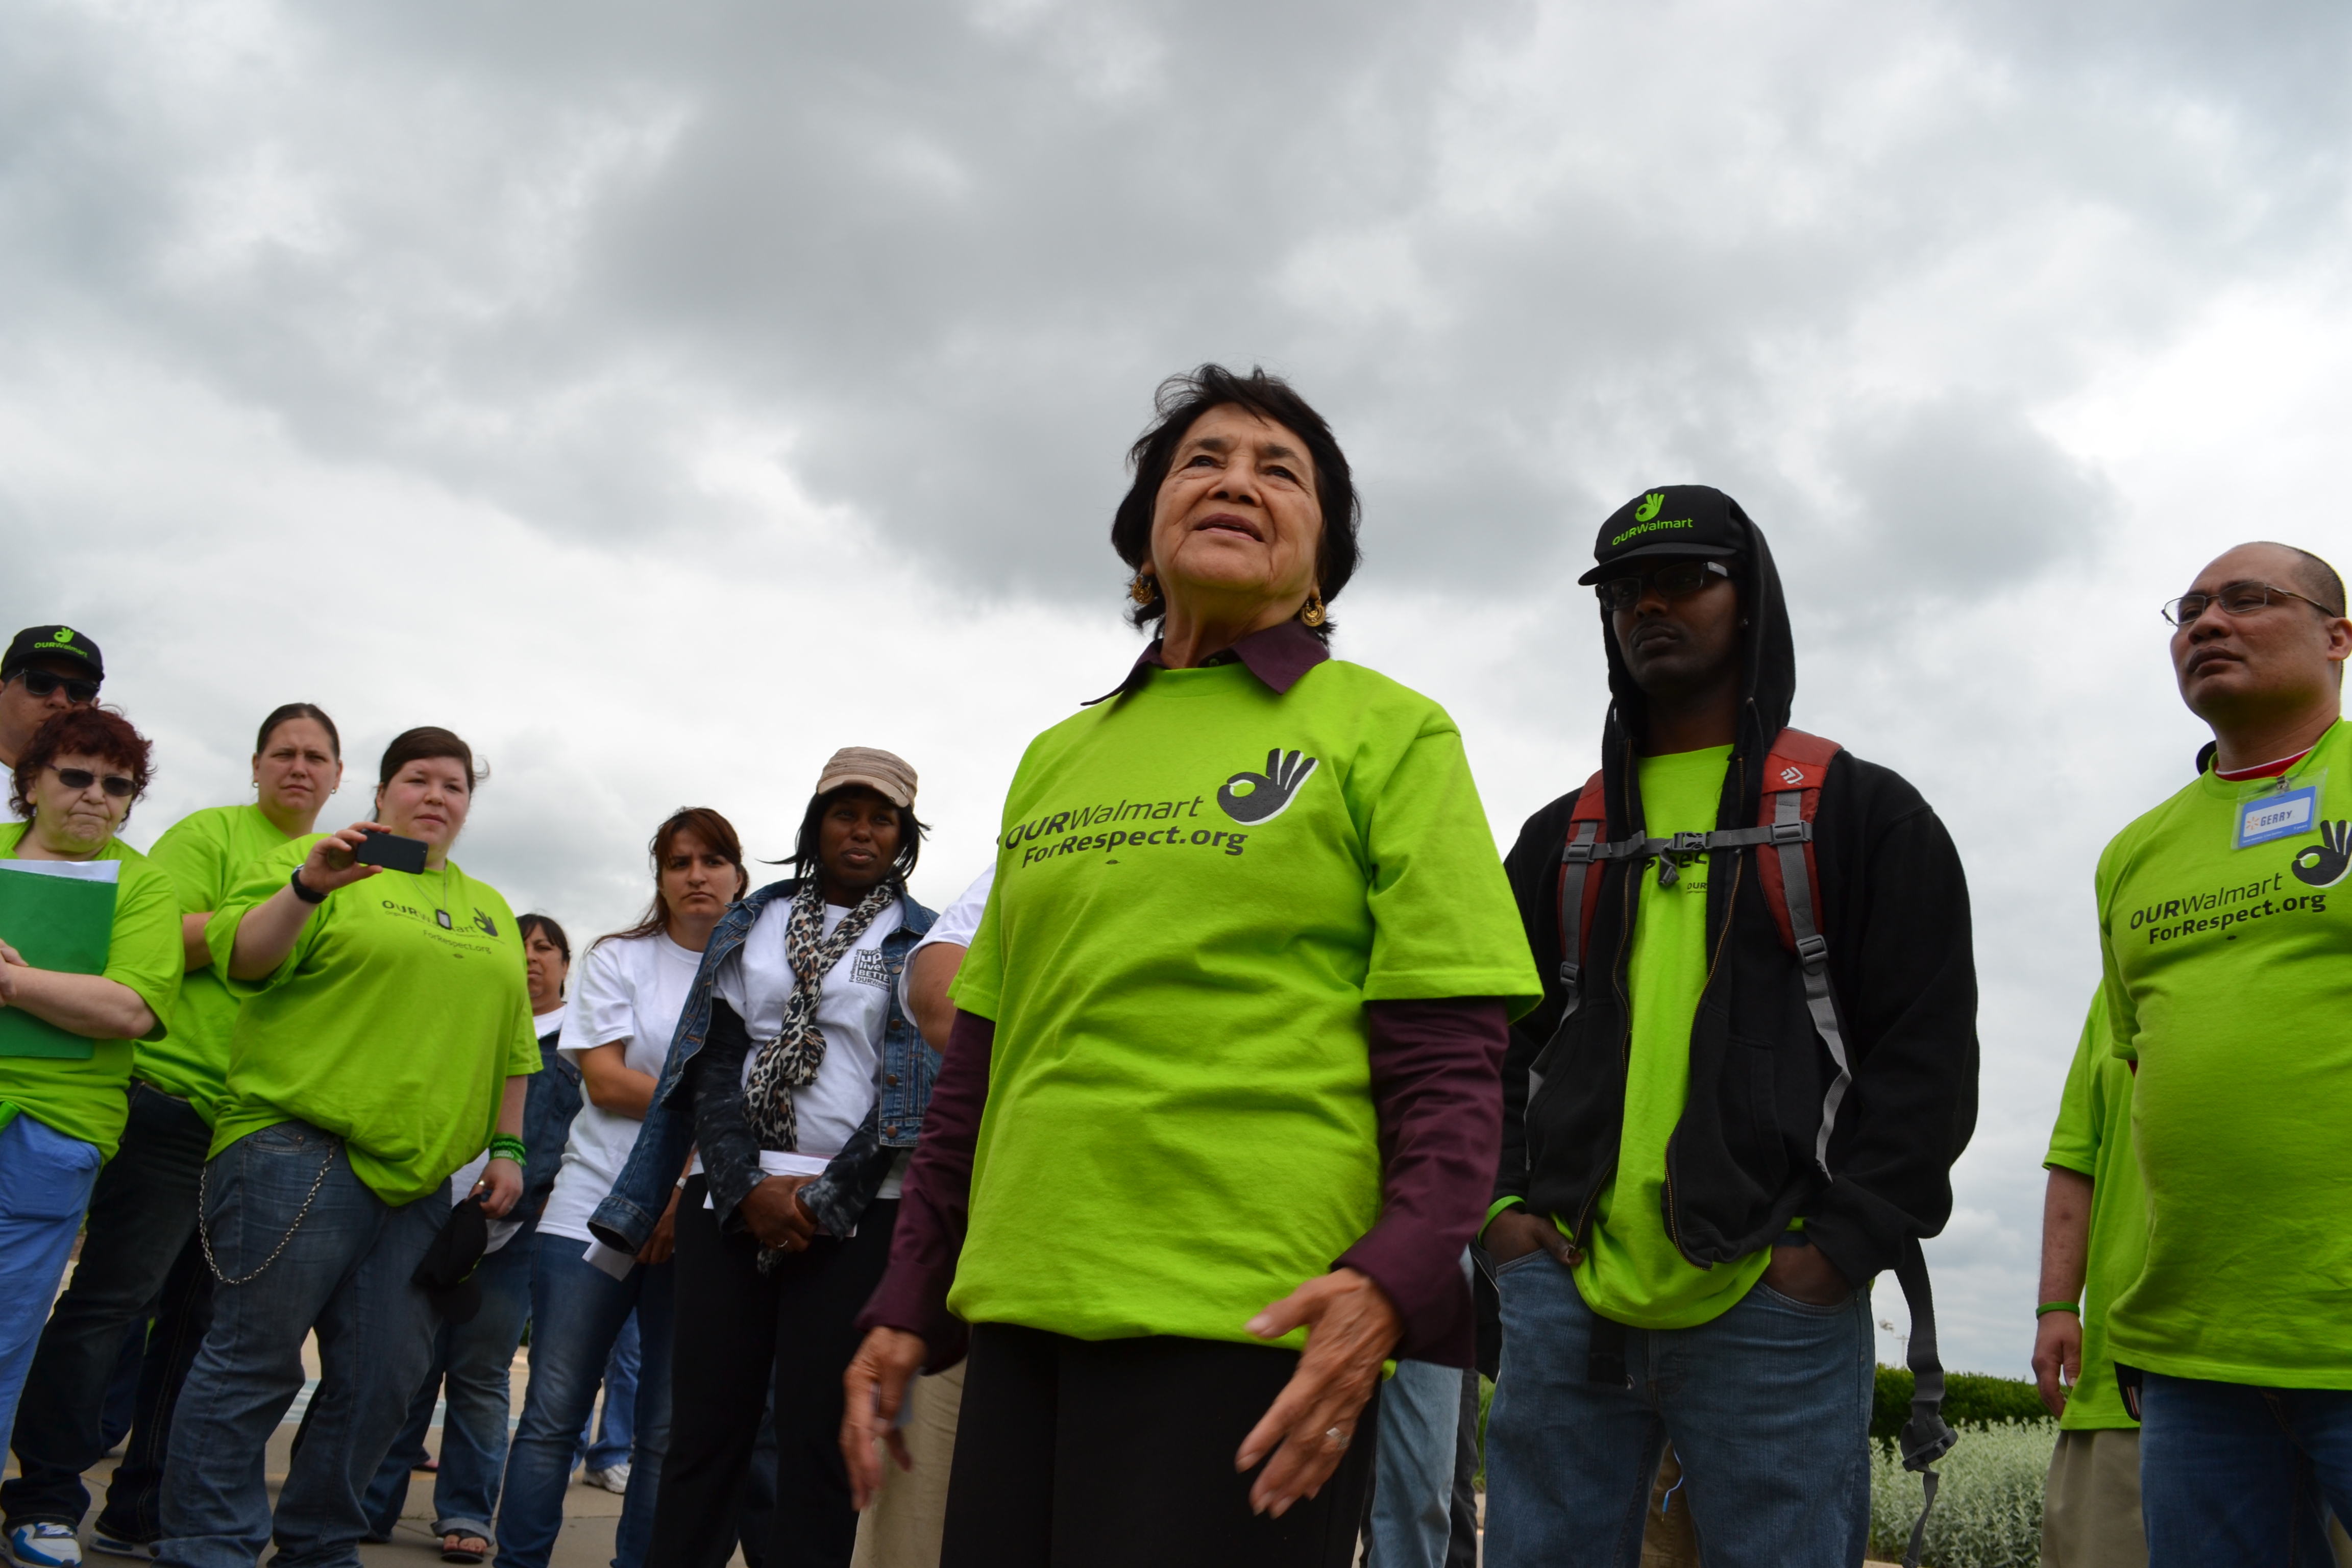 Dolores Huerta, standing with OUR Walmart members and workers during the Ride for Respect in summer 2013.